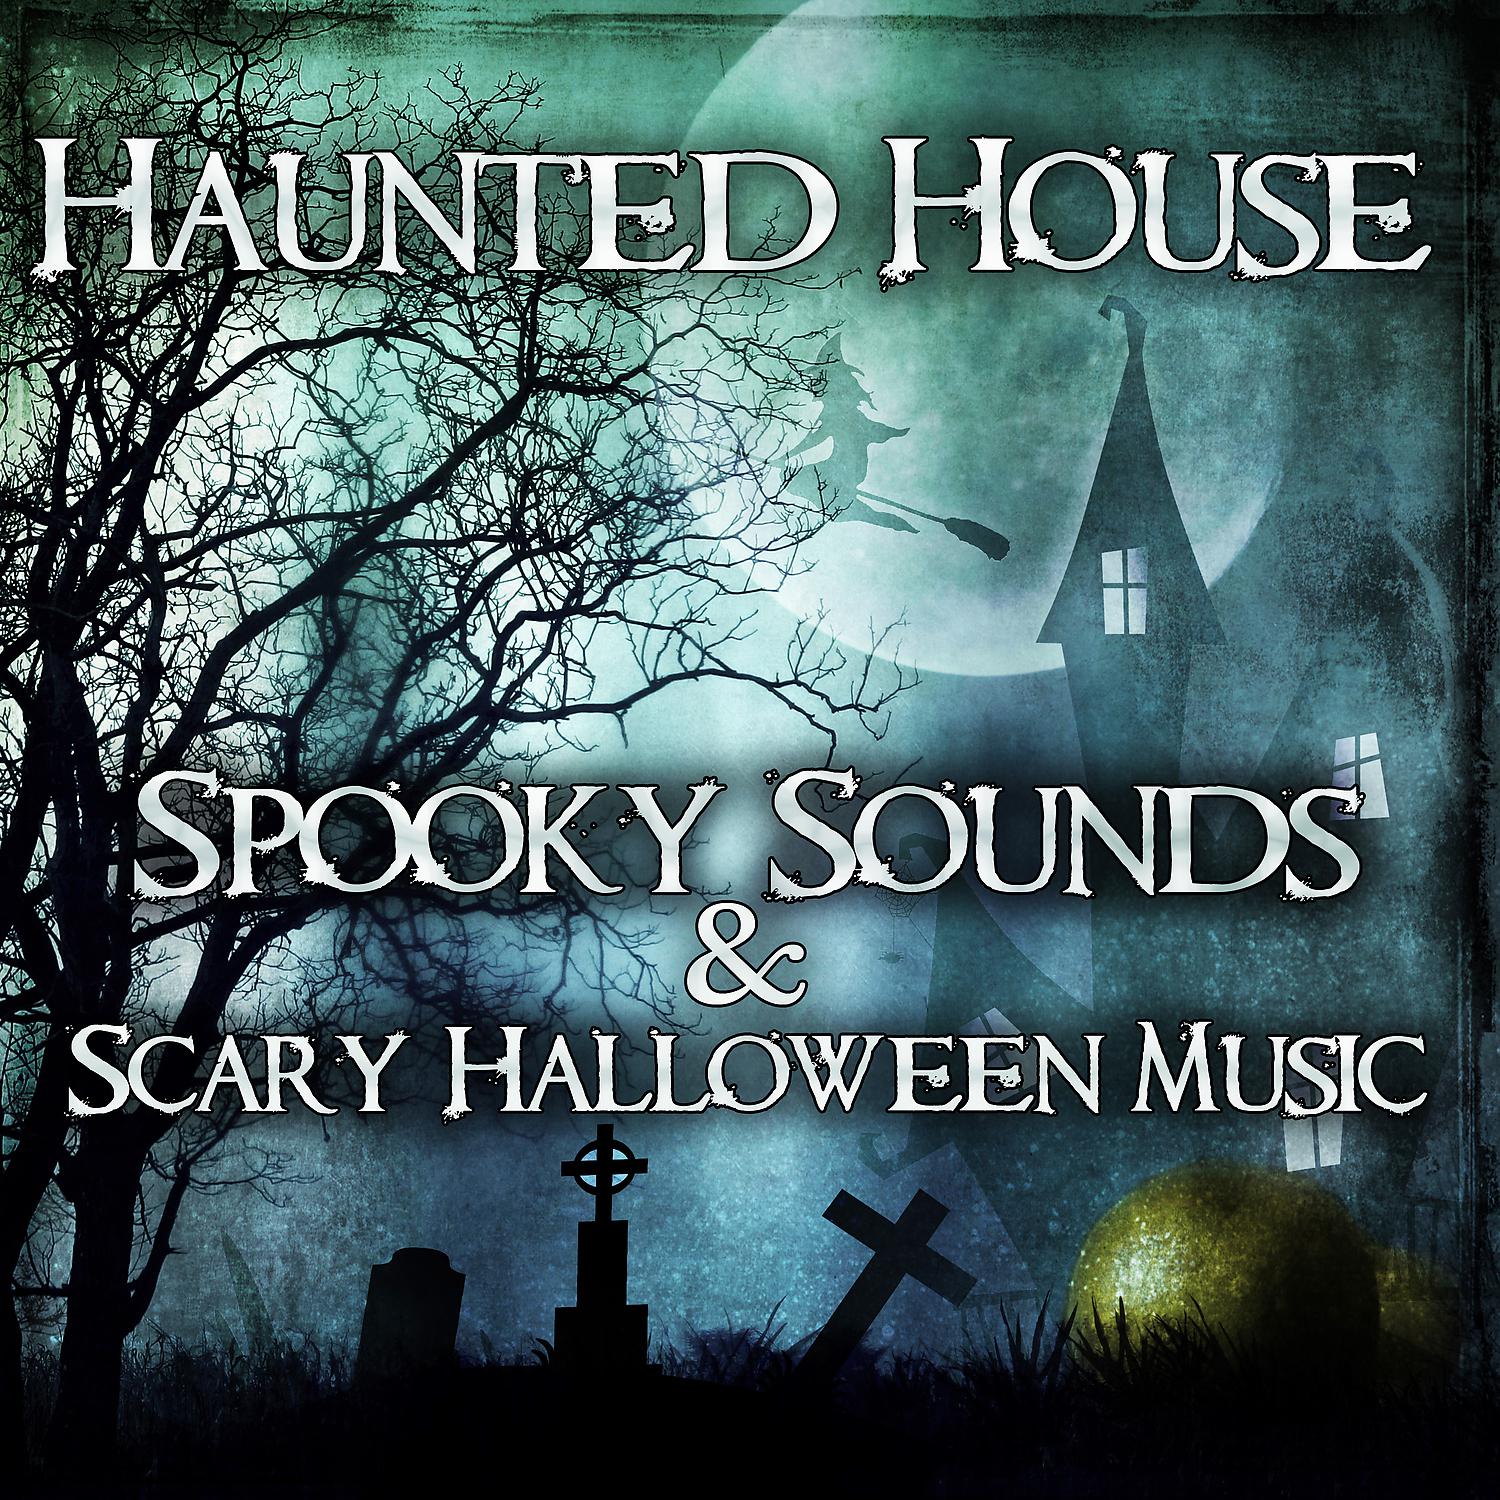 Постер альбома Haunted House: Spooky Sounds & Scary Halloween Music – Ultimate Creepy Effects, Fear Anthem, Horror Music, Best Halloween Party Collection 2016 for Everyone